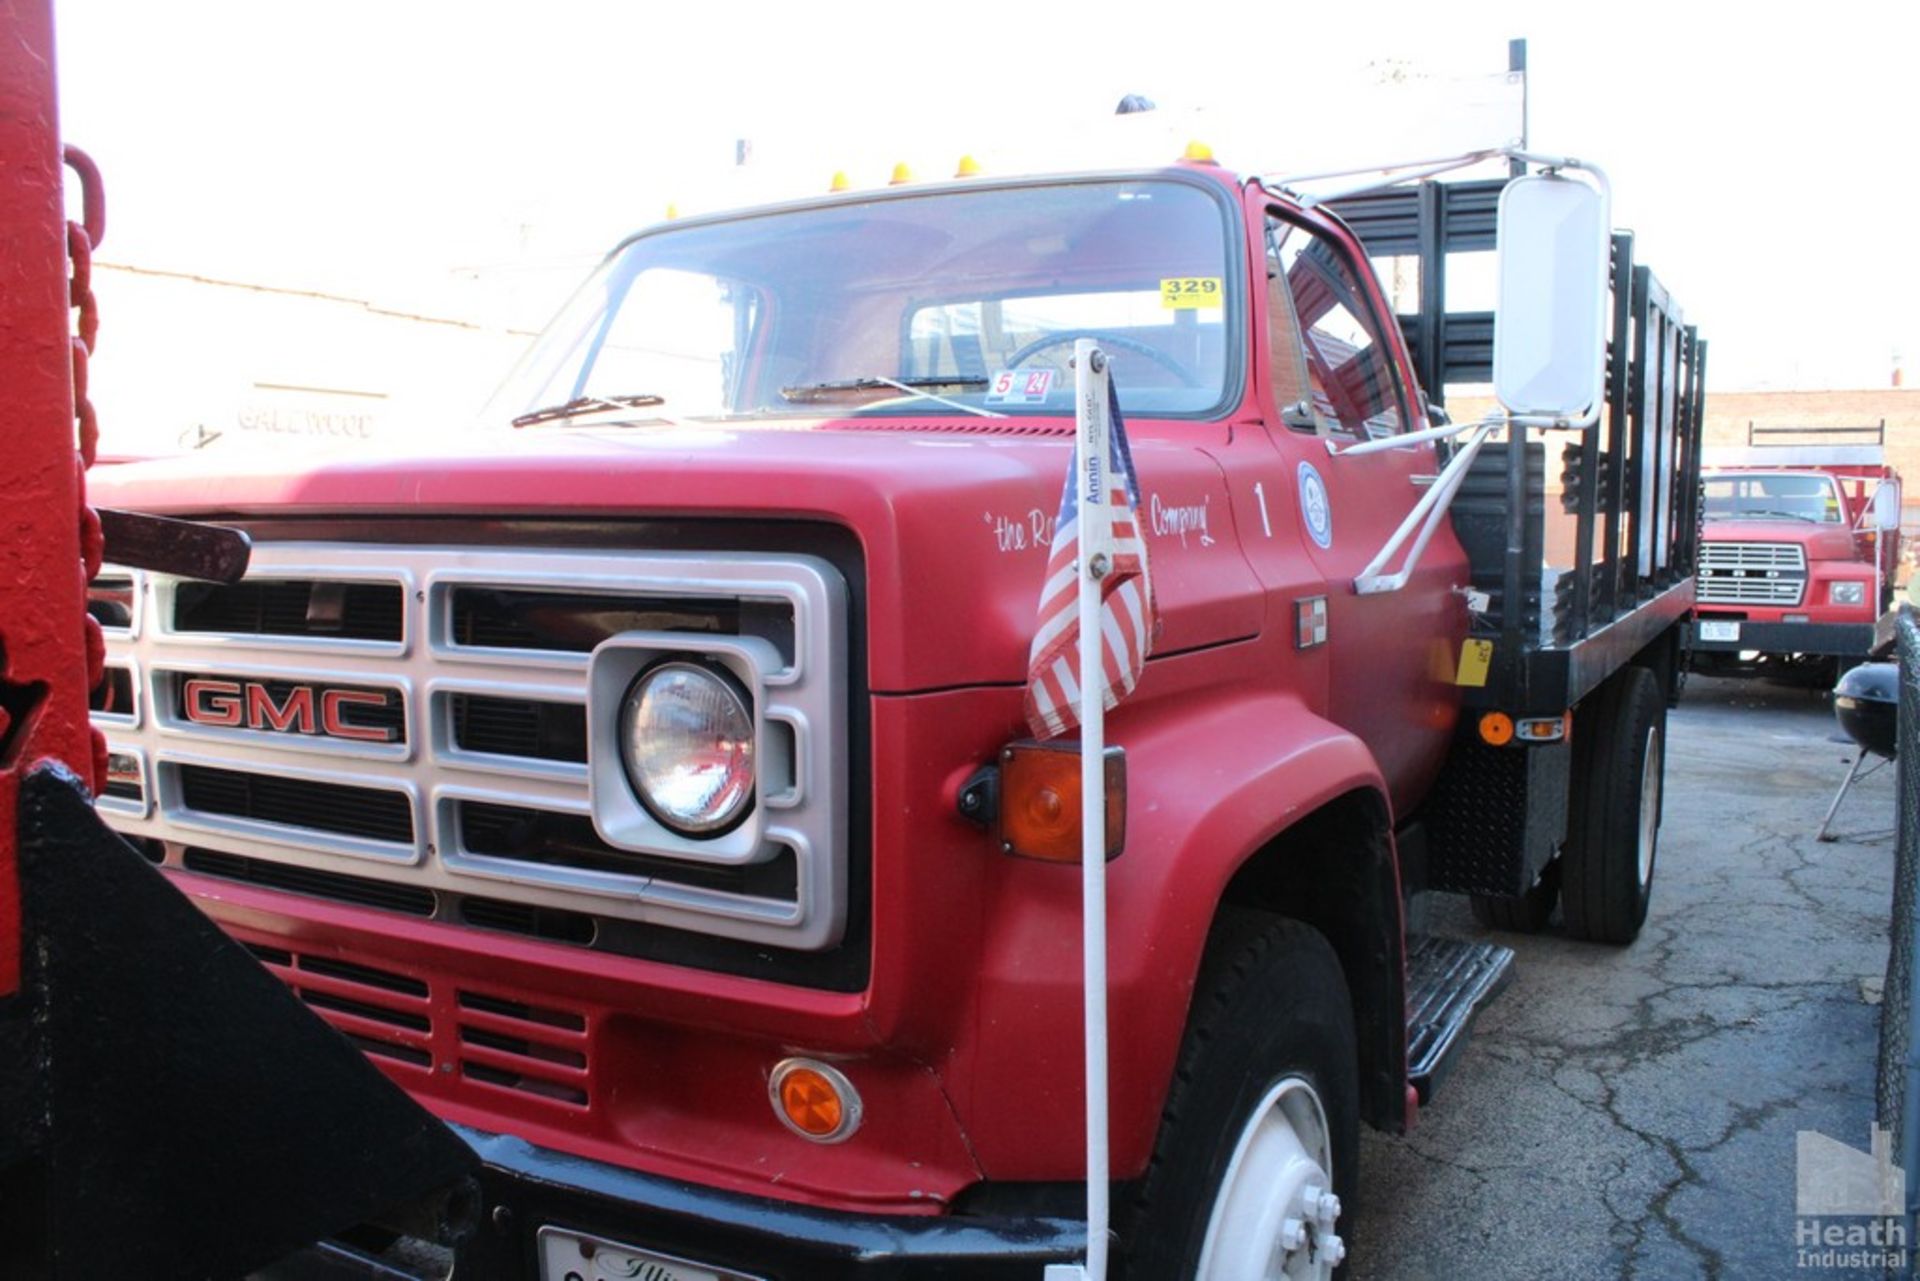 1984 GMC MODEL 6000 STAKE TRUCK, VIN: 1GDJ6D1BEV502175, 14' STEEL DECK WITH SIDE REMOVABLE GUARDS, - Image 2 of 9